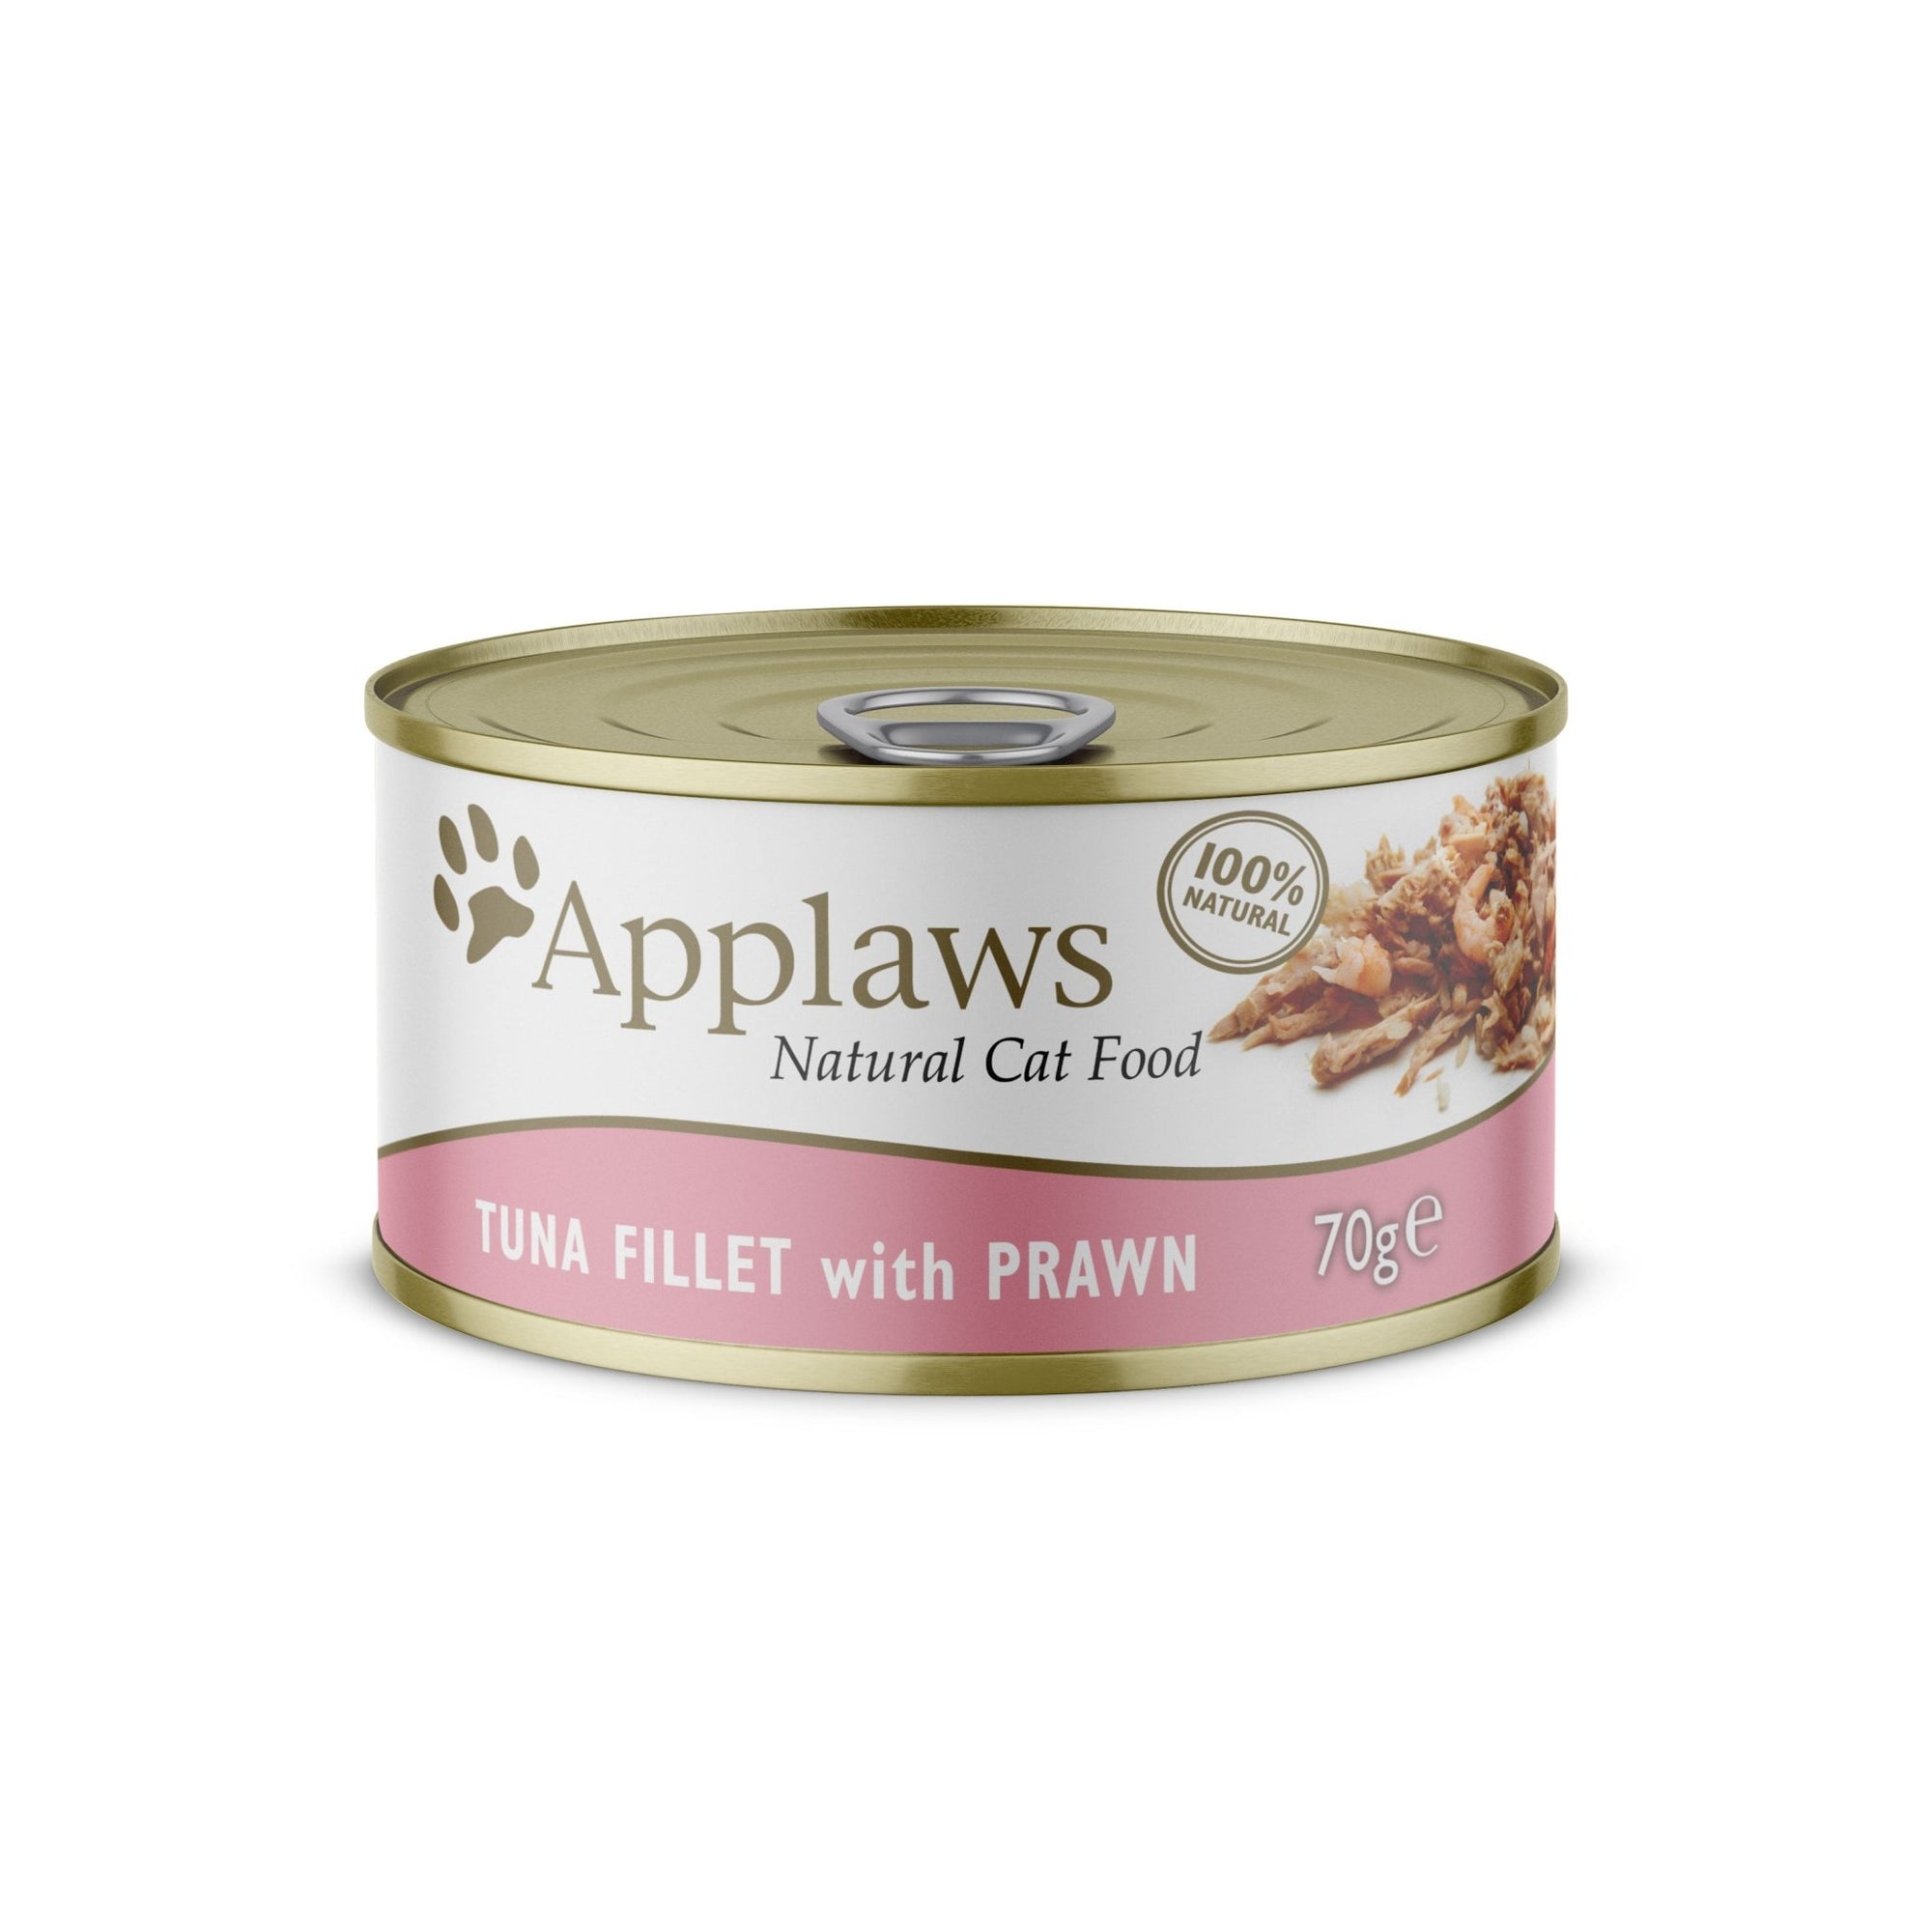 Applaws Cat Tuna Fillet with Prawn in Broth Tins 24 x 70g, Applaws,